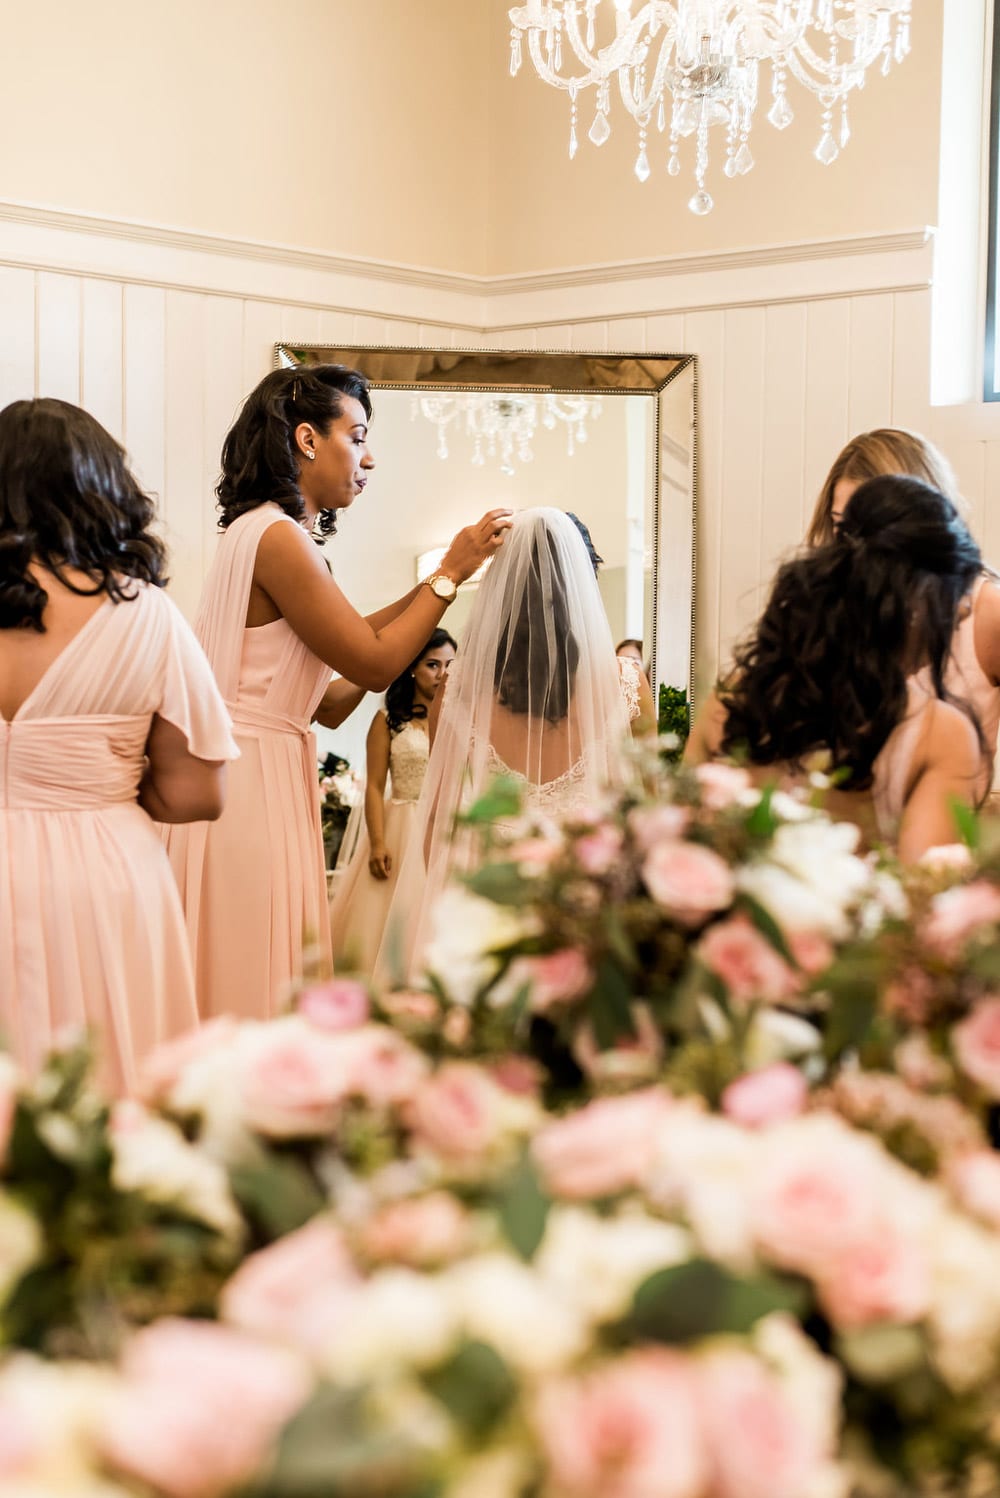 Bride getting ready in front of mirror